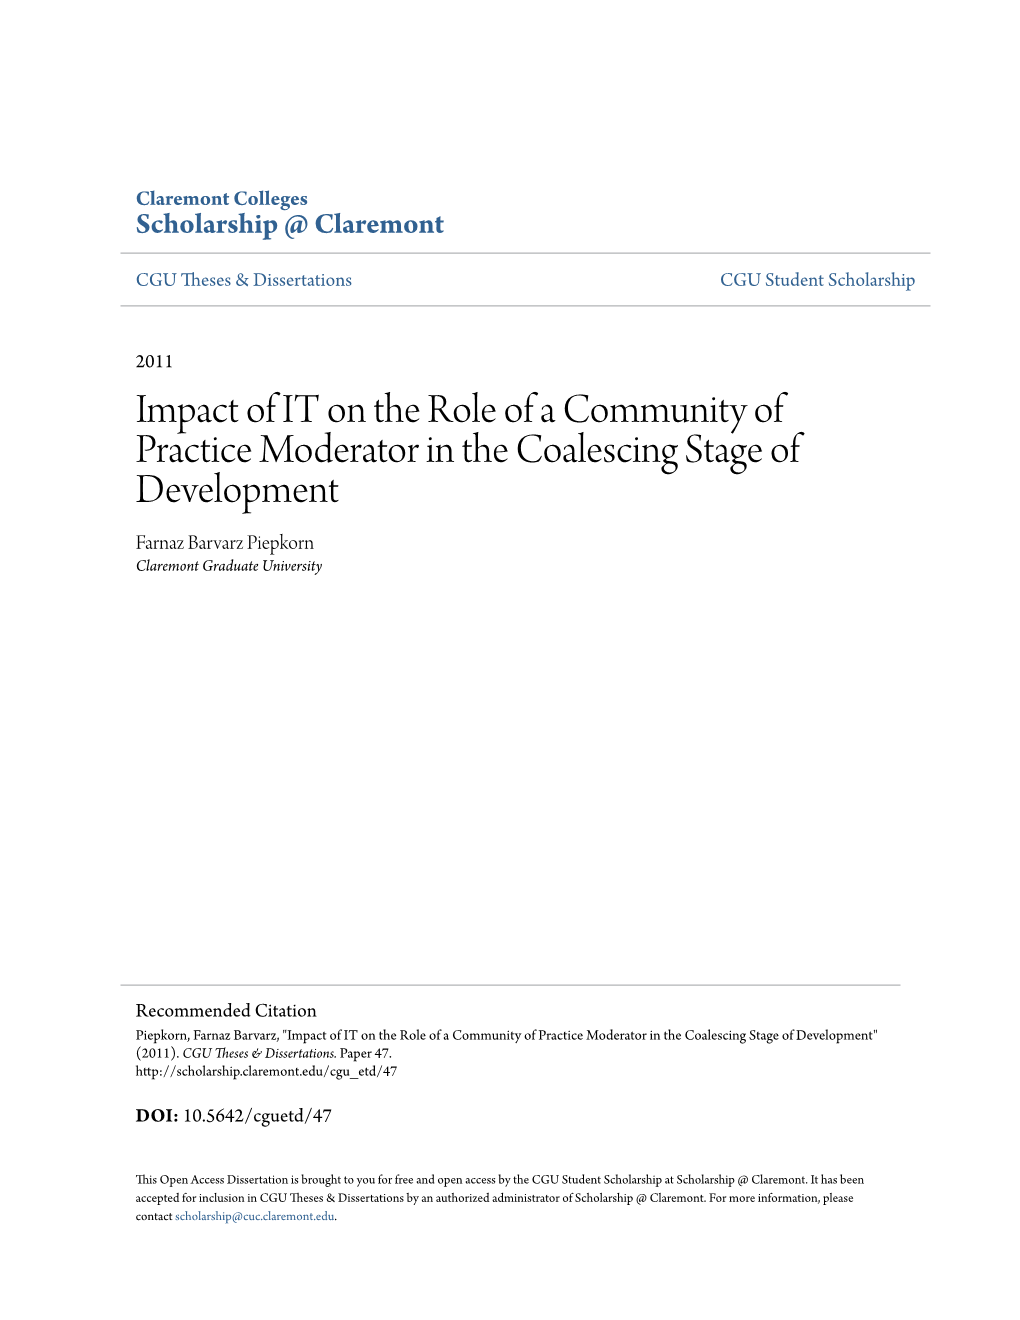 Impact of IT on the Role of a Community of Practice Moderator in the Coalescing Stage of Development Farnaz Barvarz Piepkorn Claremont Graduate University